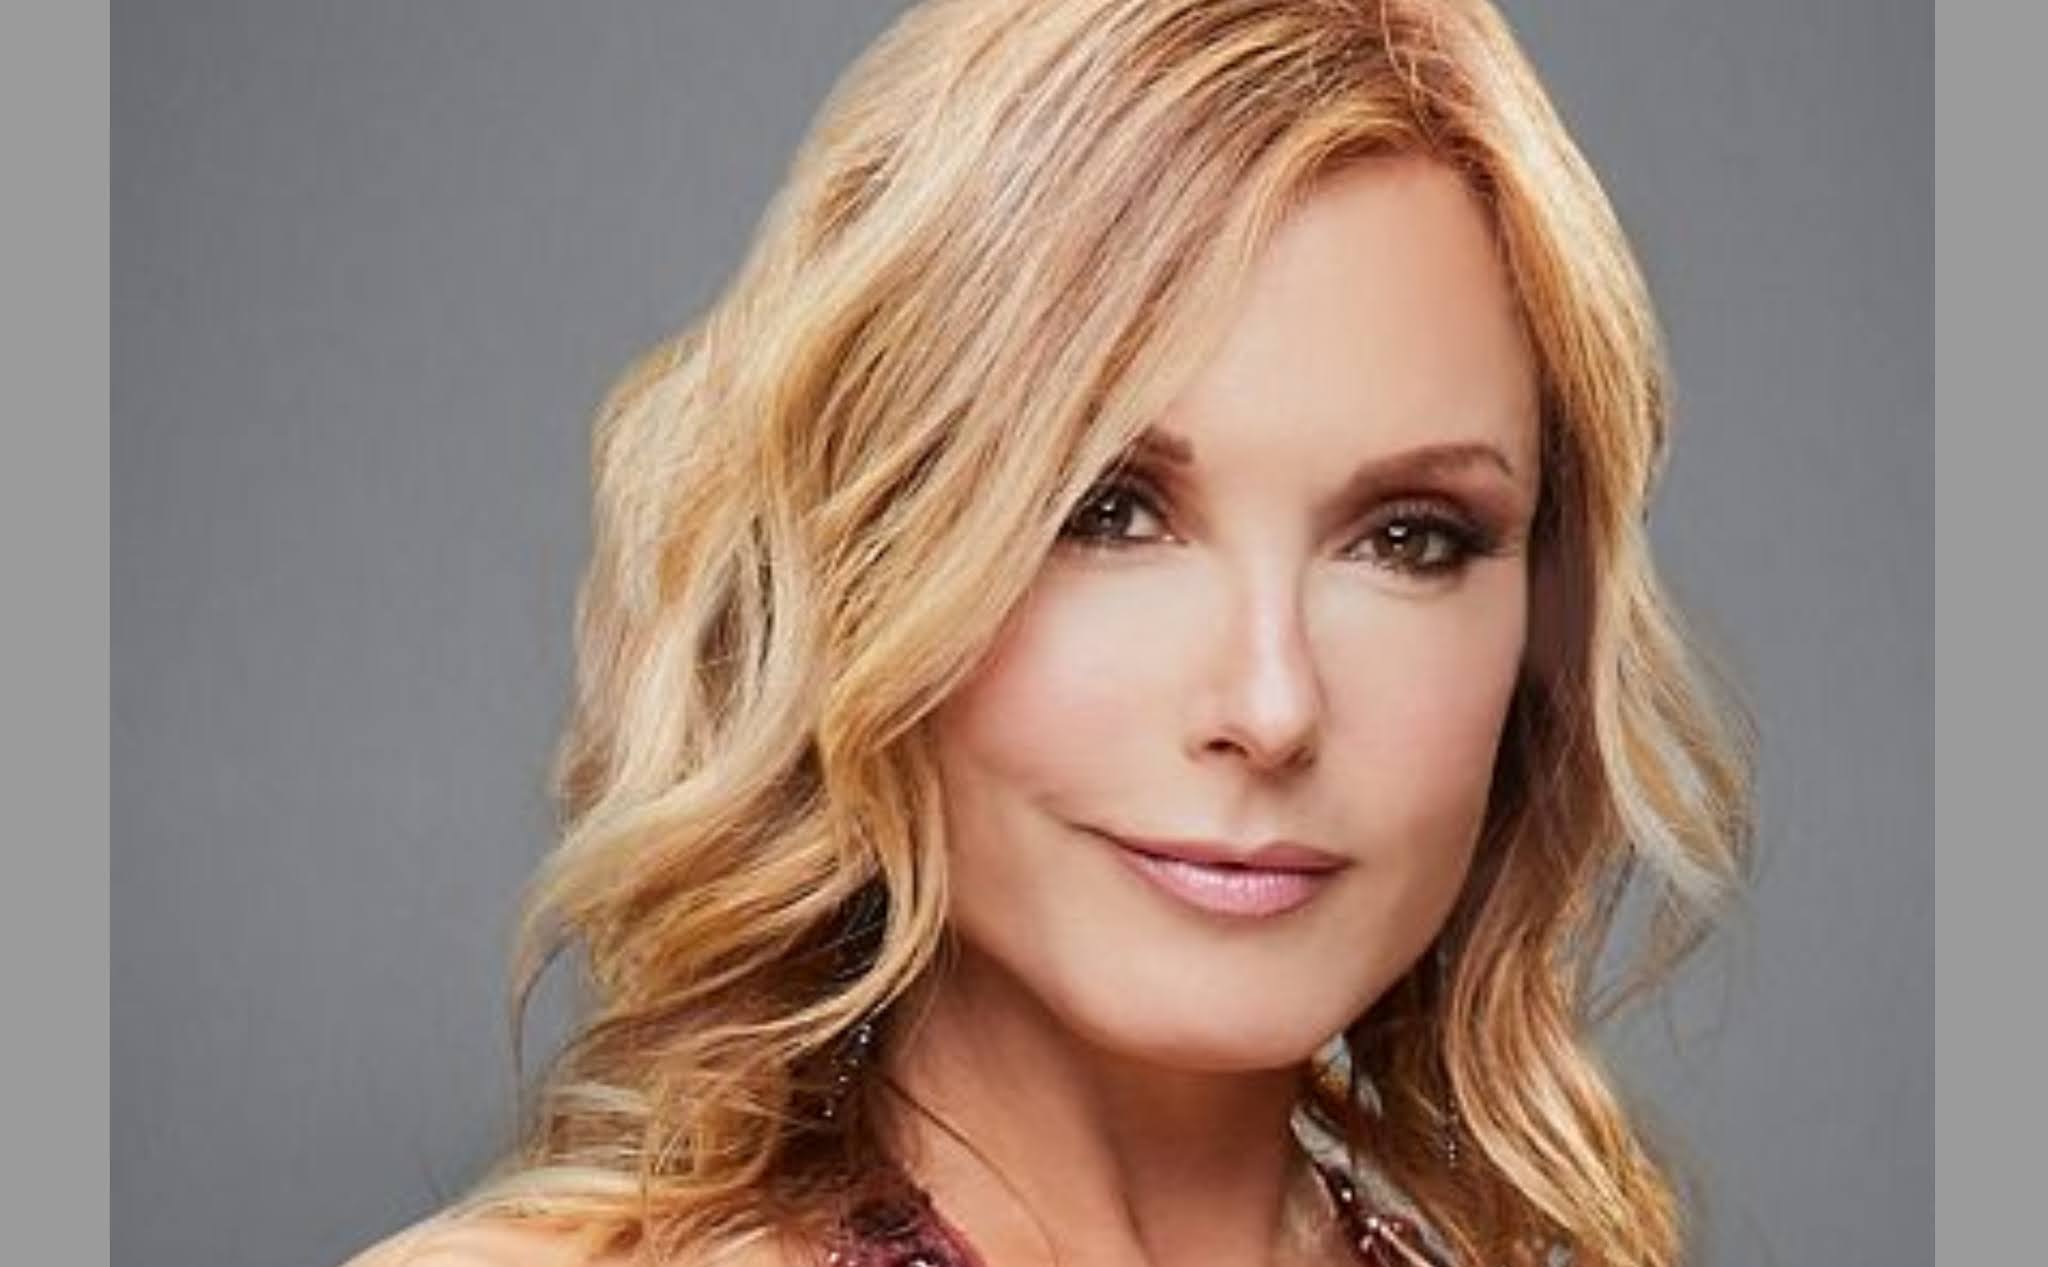 The Young and the Restless' Tracey E. Bregman (Lauren Fenmore Baldwin)